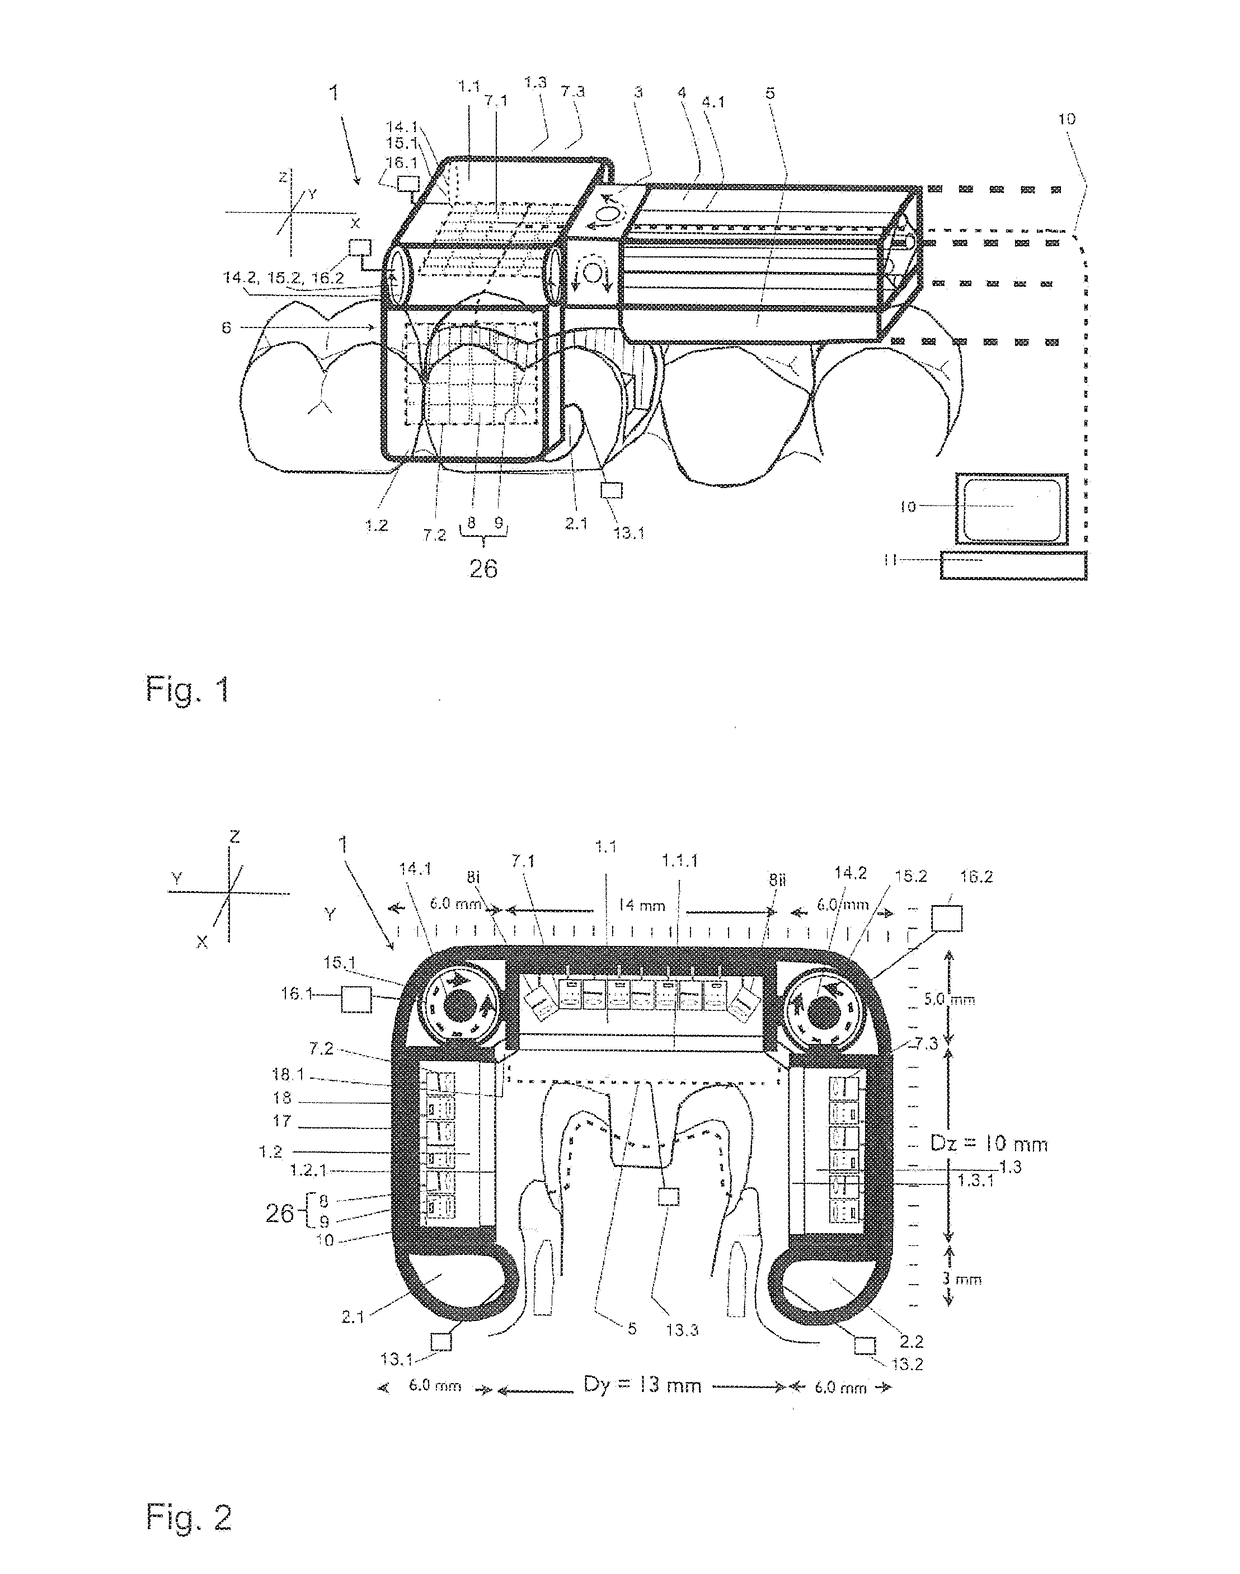 Measuring apparatus and method for three-dimensional measurement of an oral cavity